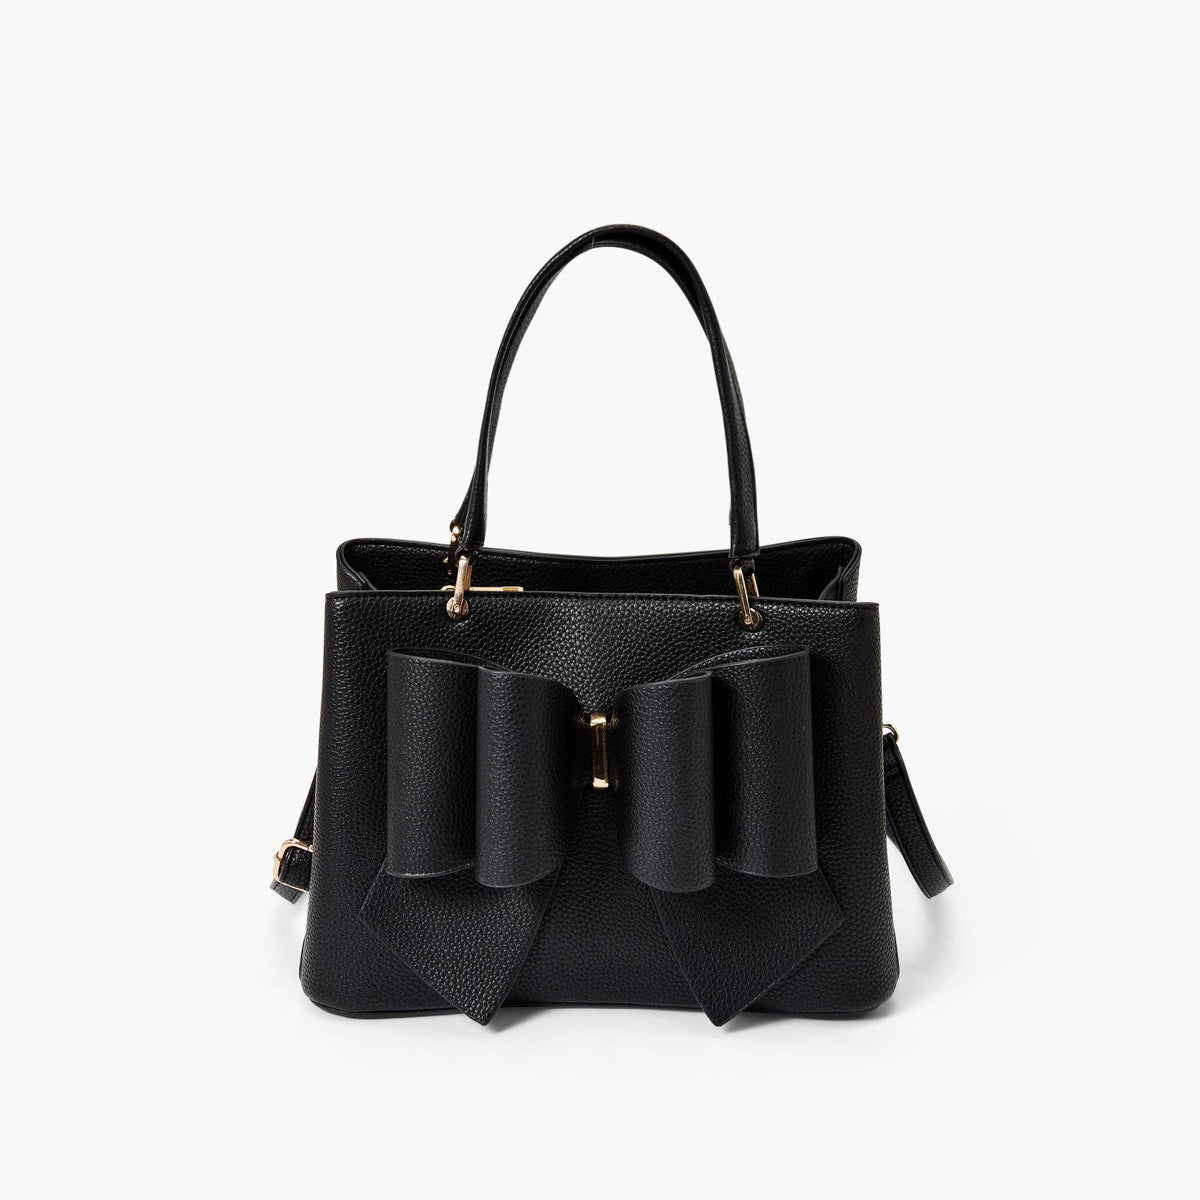 CLEARANCE: Bow Spring Satchel